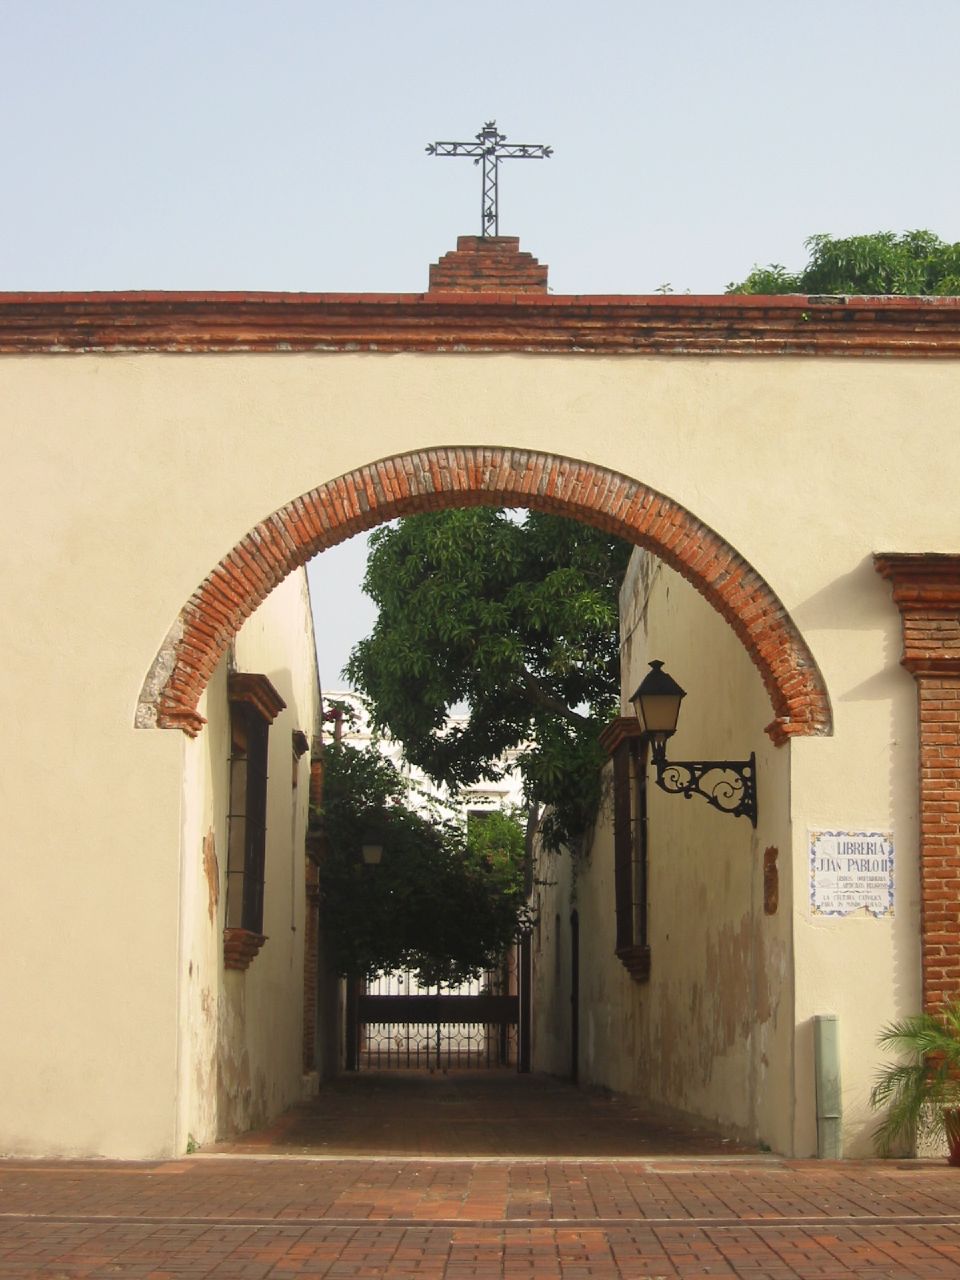 an arched archway leads into an alley that is made of bricks